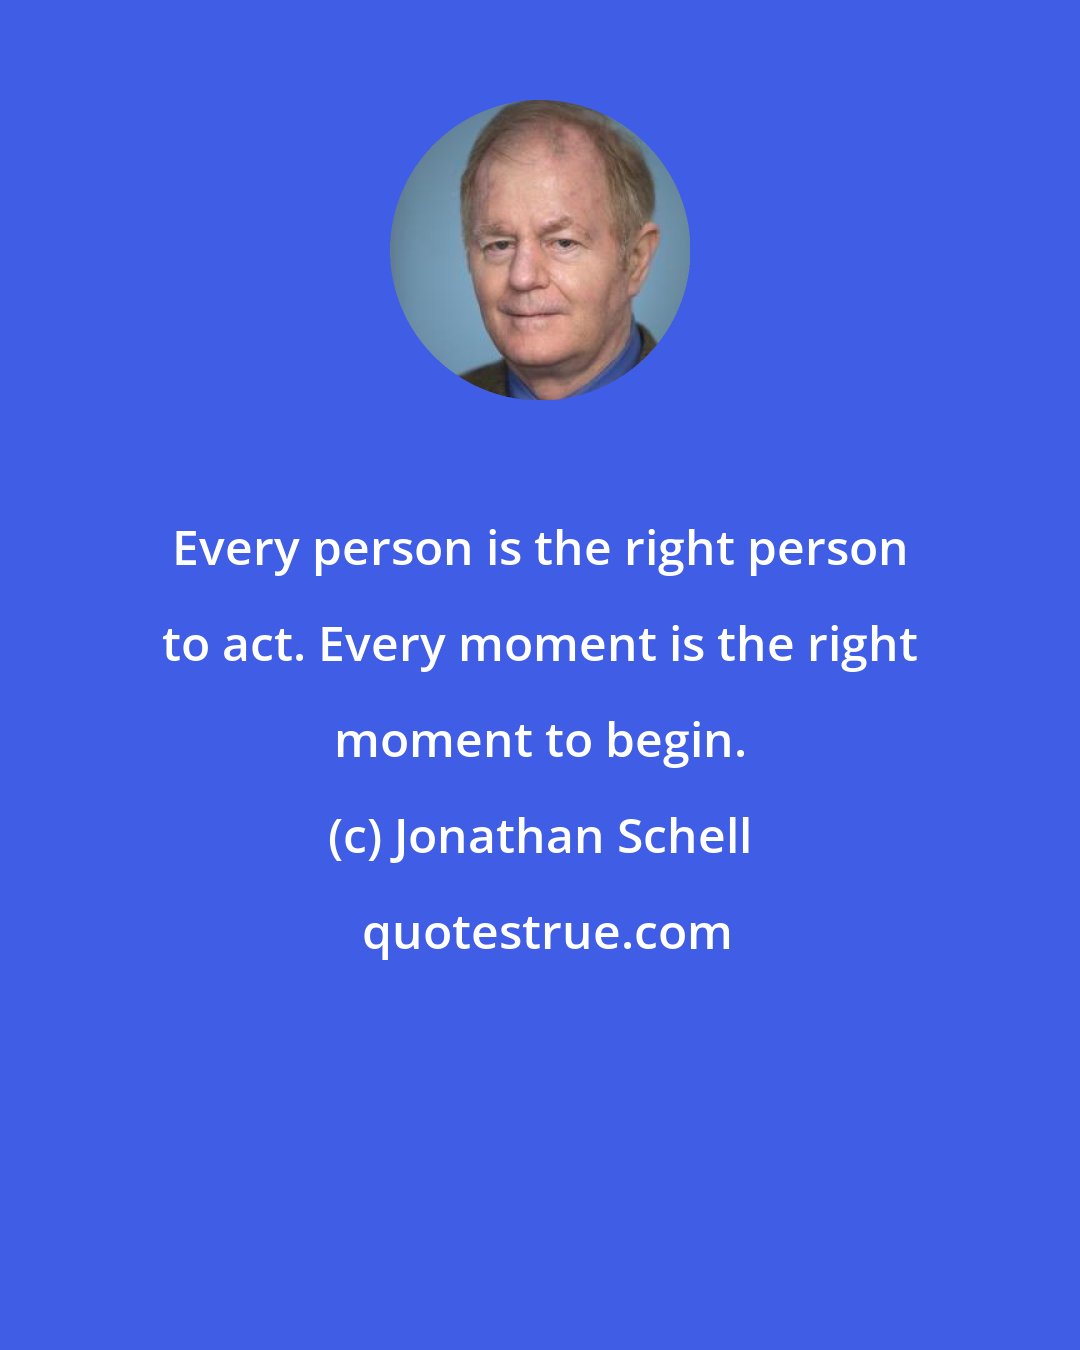 Jonathan Schell: Every person is the right person to act. Every moment is the right moment to begin.